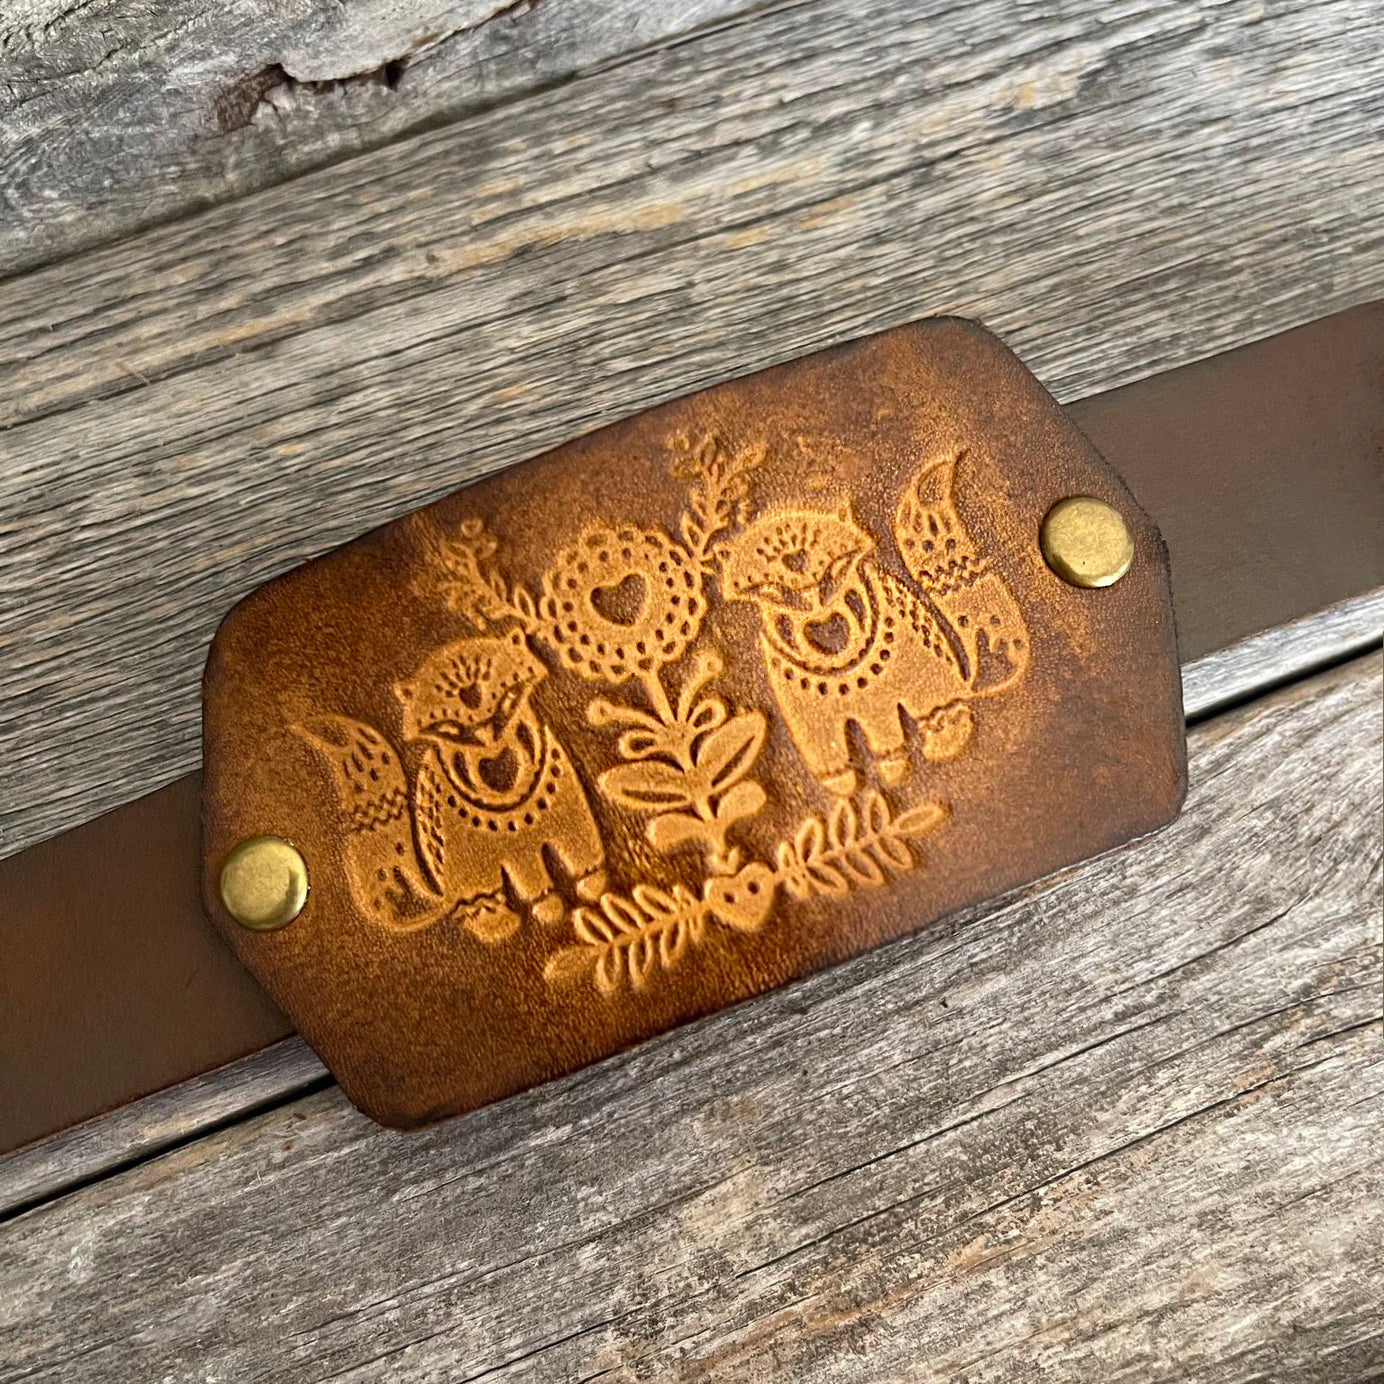 MADE TO ORDER - Genuine Leather Bracelet with Tooled Fox Design